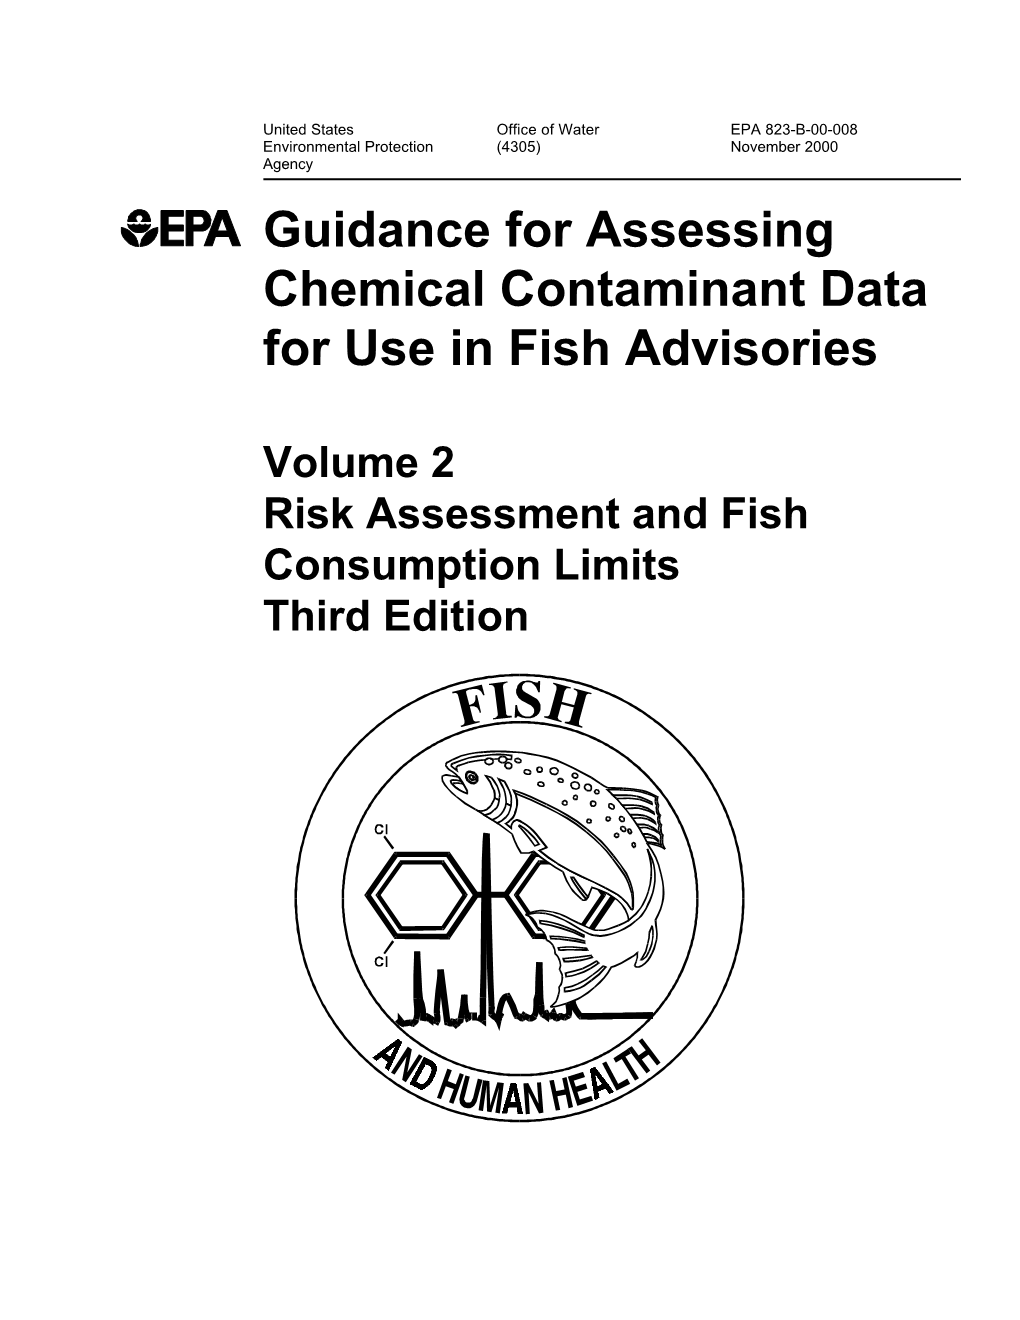 Guidance for Assessing Chemical Contaminant Data for Use in Fish Advisories